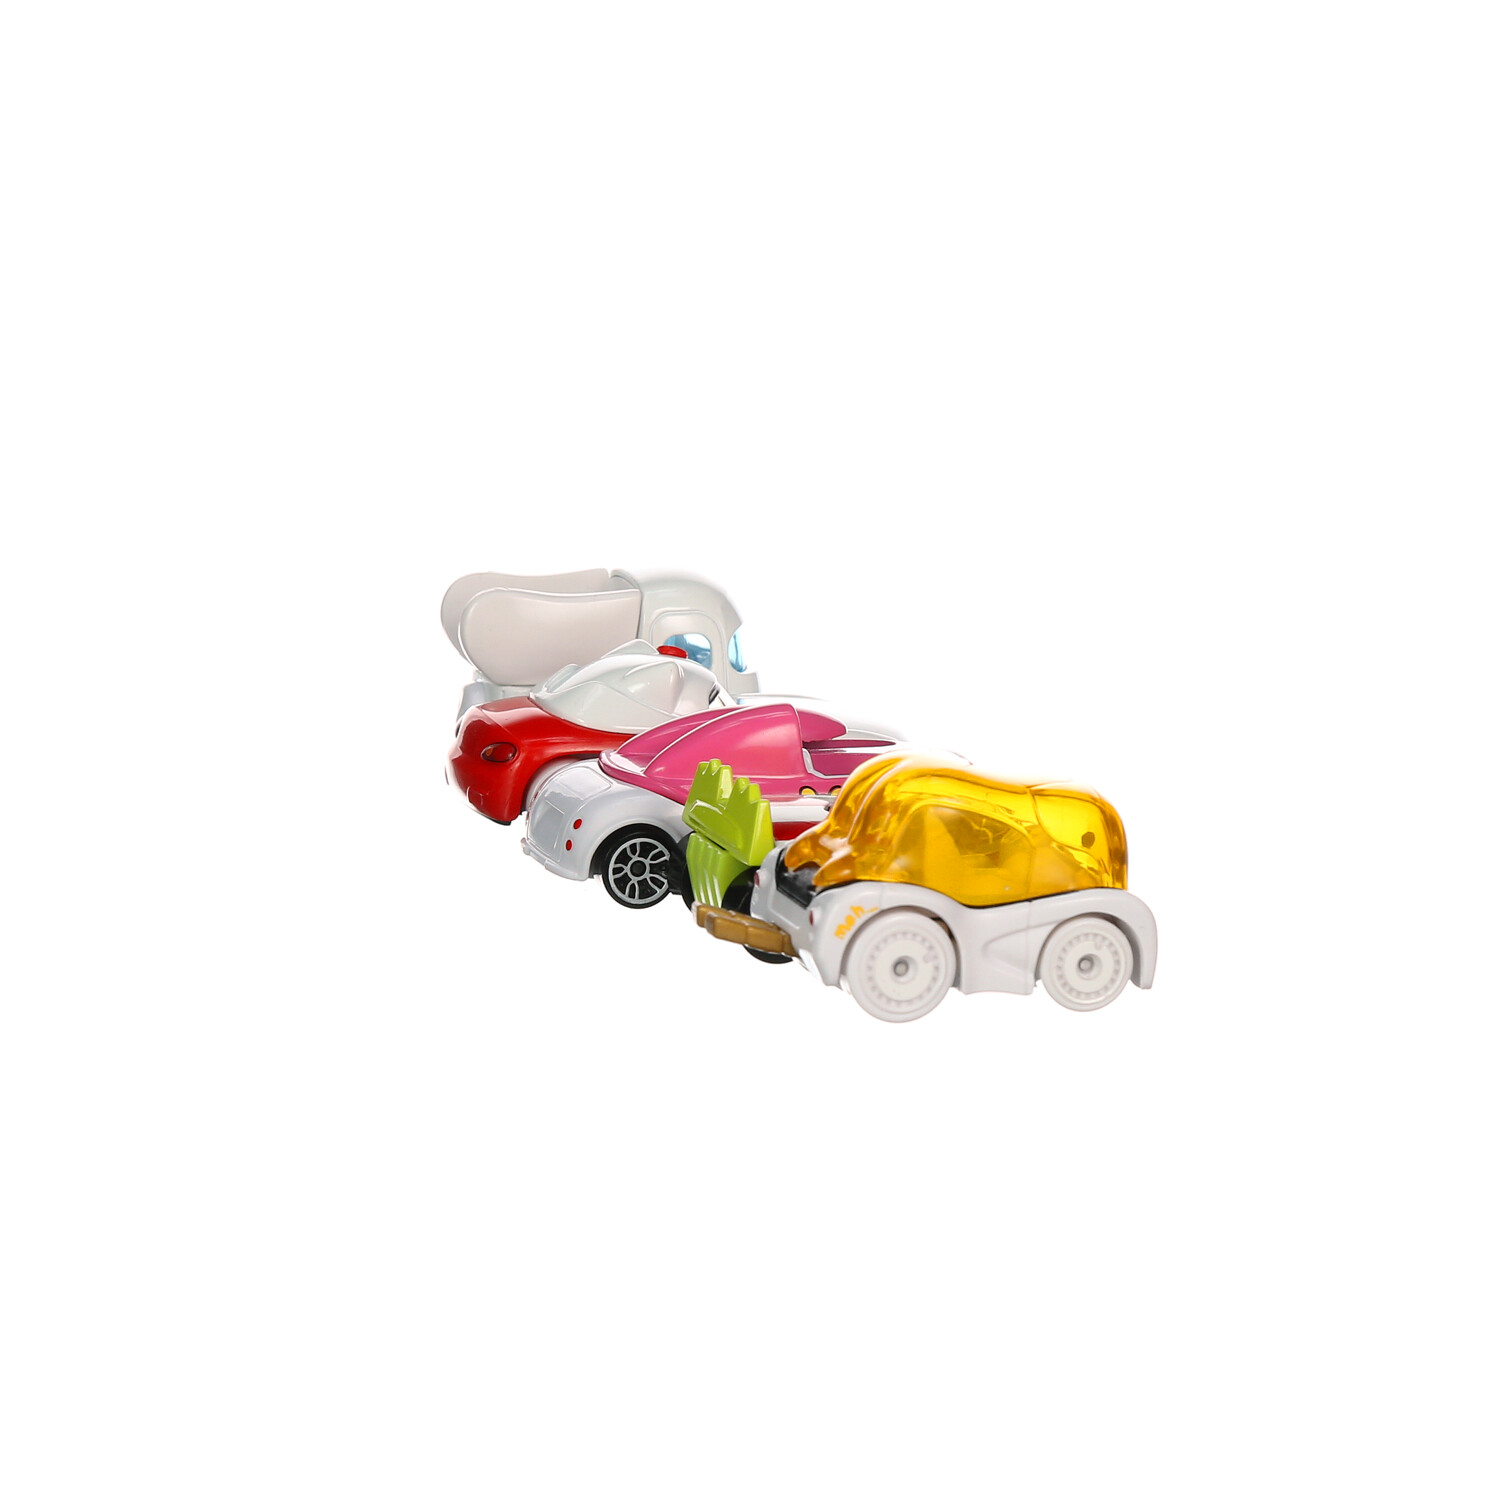 Hot Wheels Sanrio Hello Kitty and Friends Character Cars 5-Pack Set